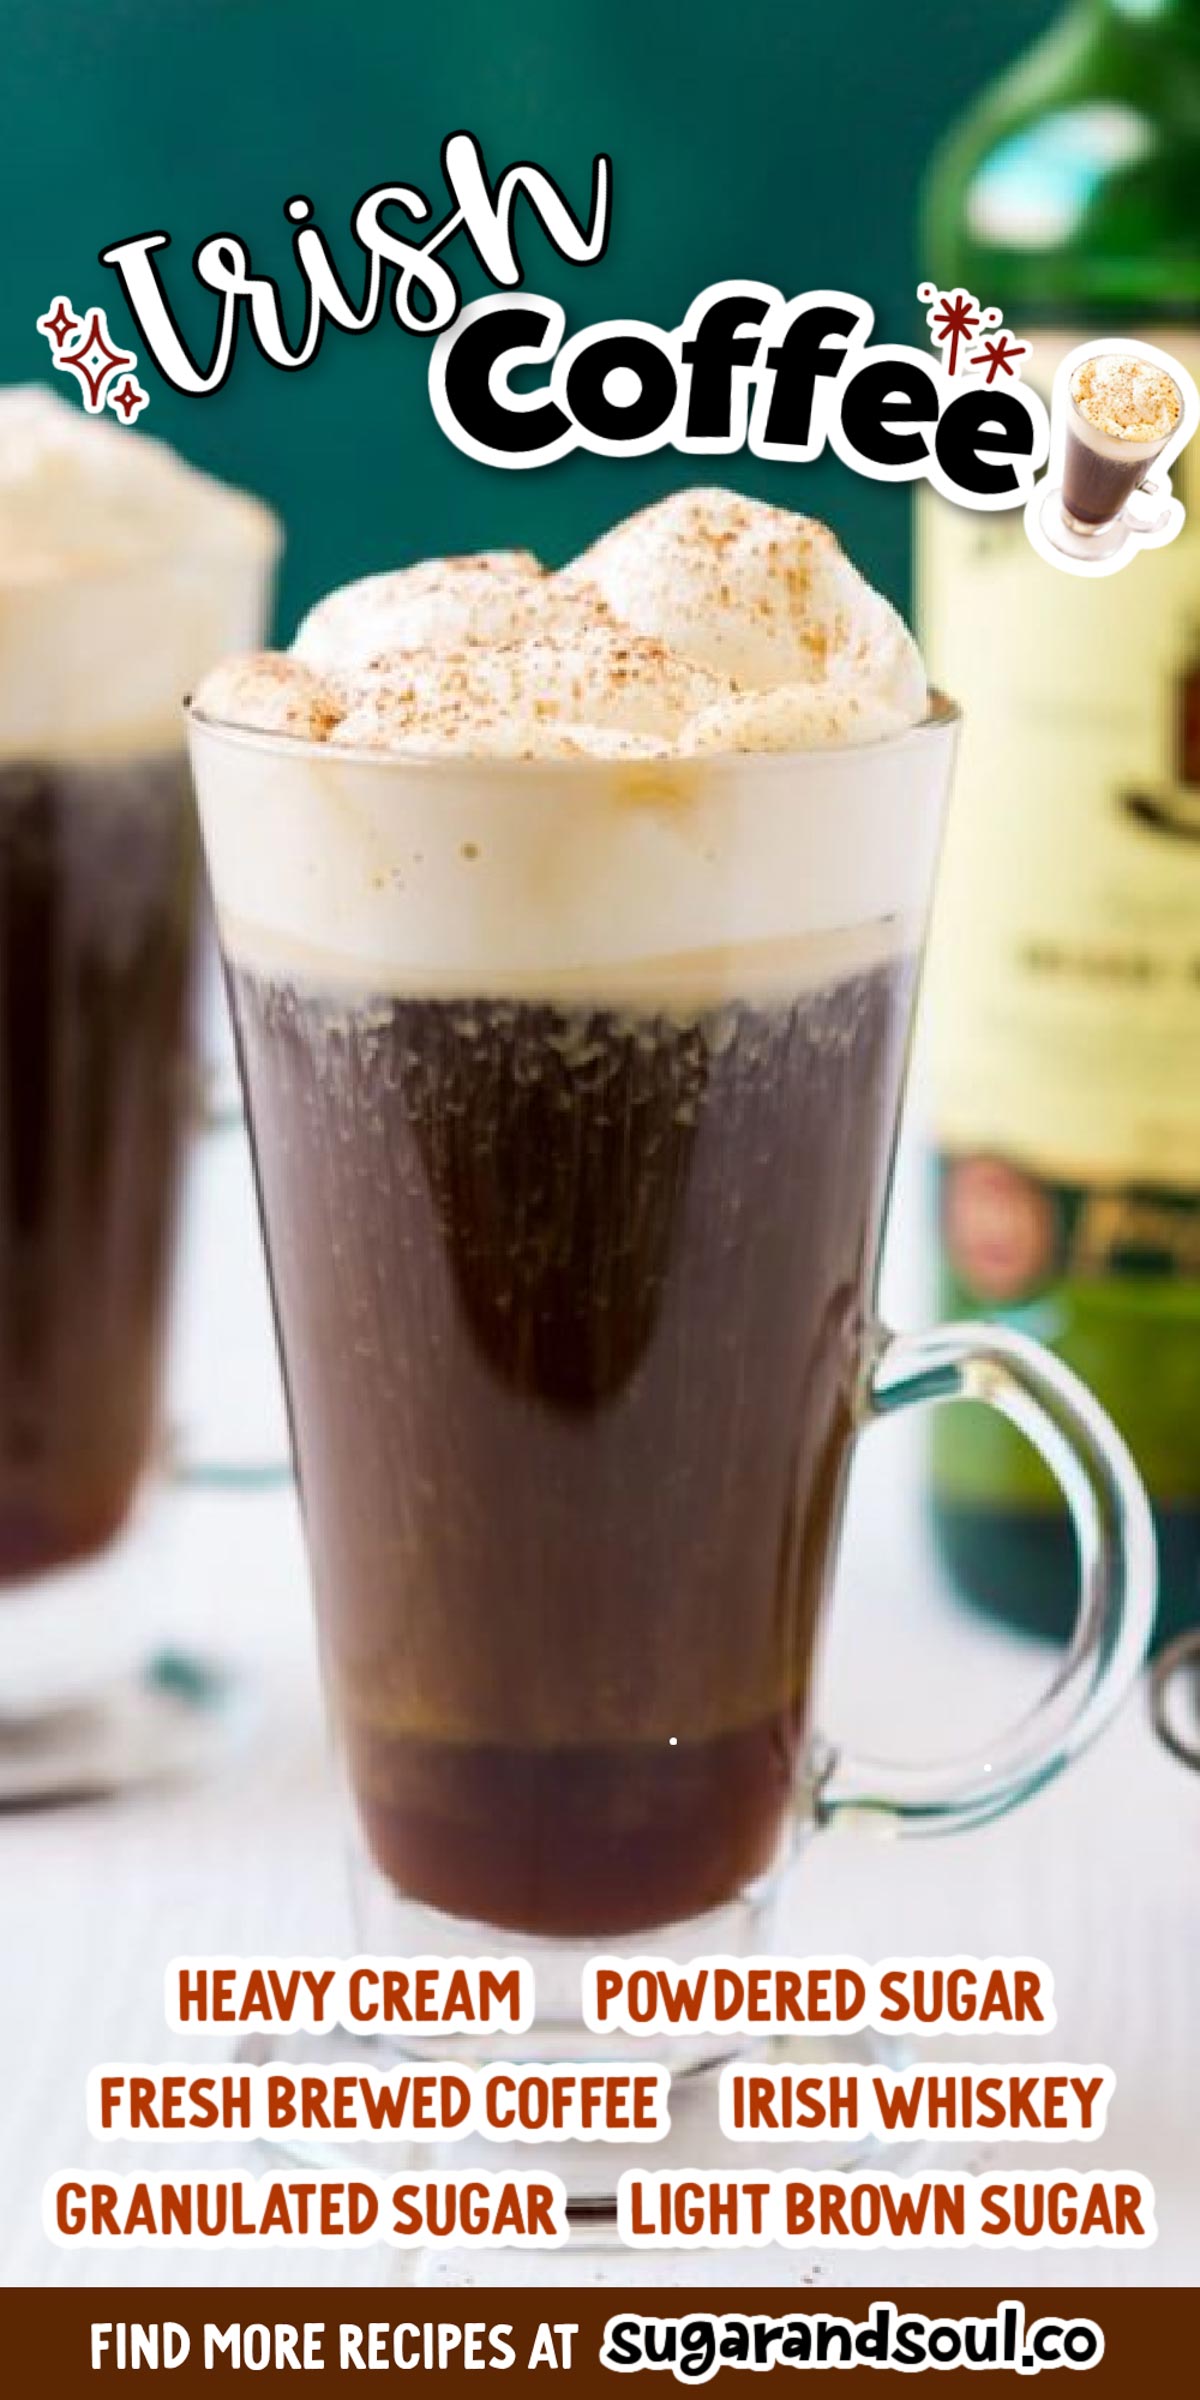 This Irish Coffee is a traditional drink recipe made with coffee, whiskey, sugar, brown sugar, and whipped cream. A spiked coffee that's perfect for weekends and dessert. via @sugarandsoulco